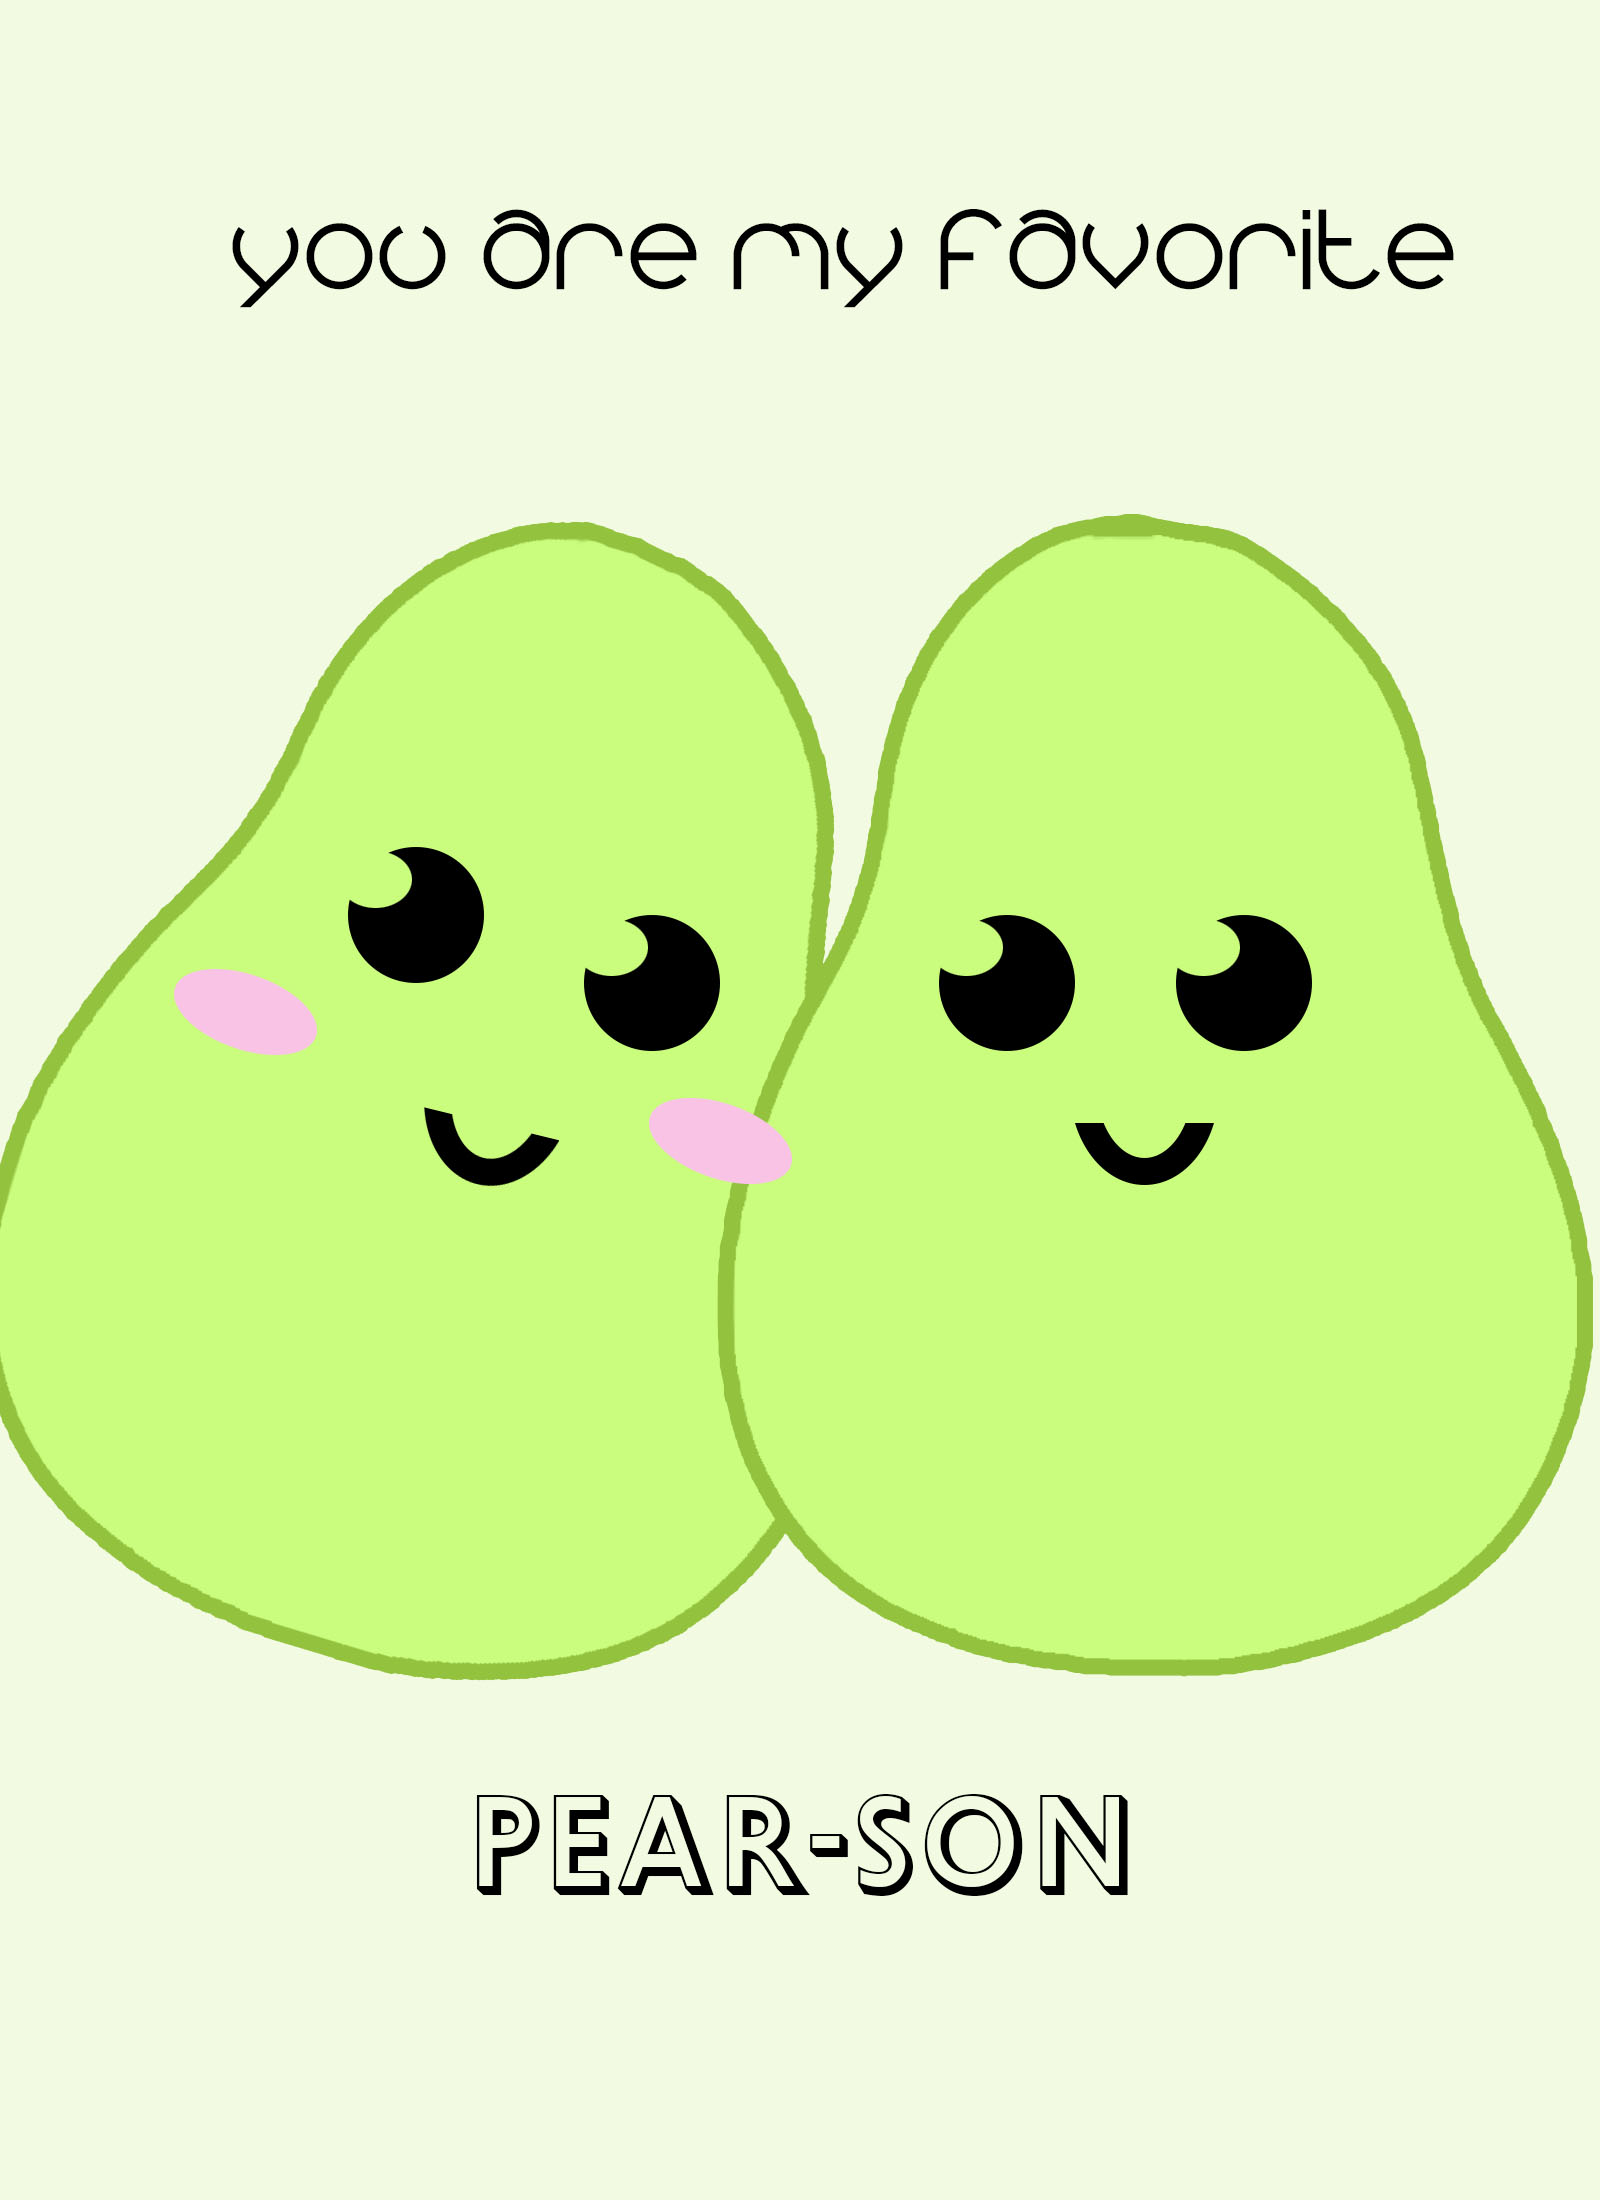 pear valentines greeting card free